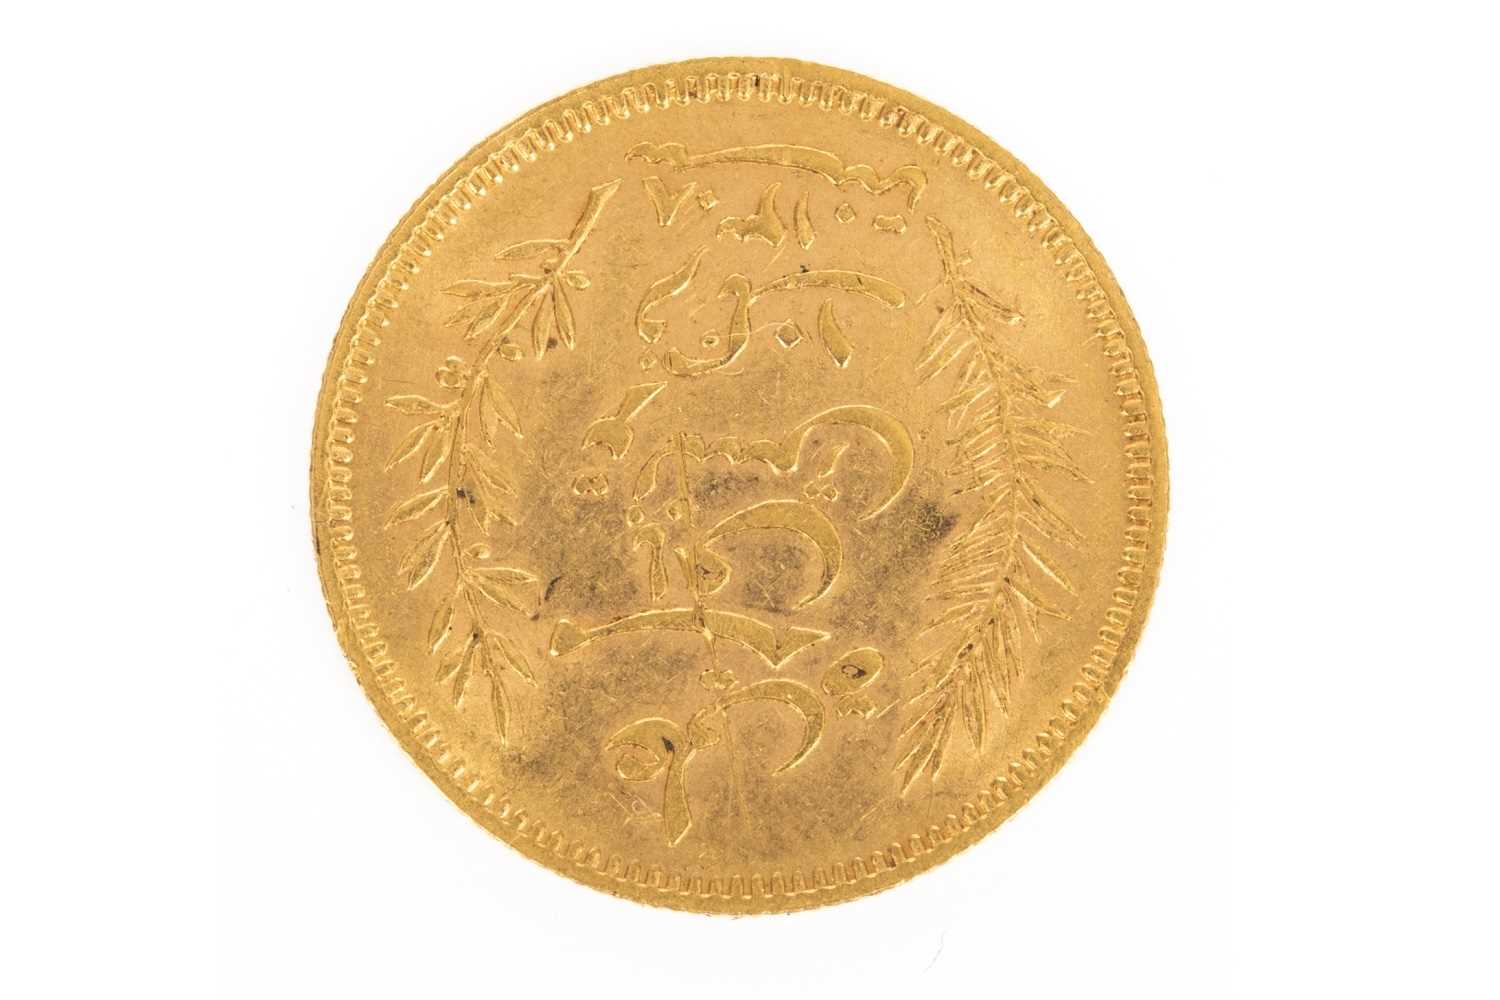 Lot 610 - A GOLD TUNISIE 10 FRANCS COIN, 1891